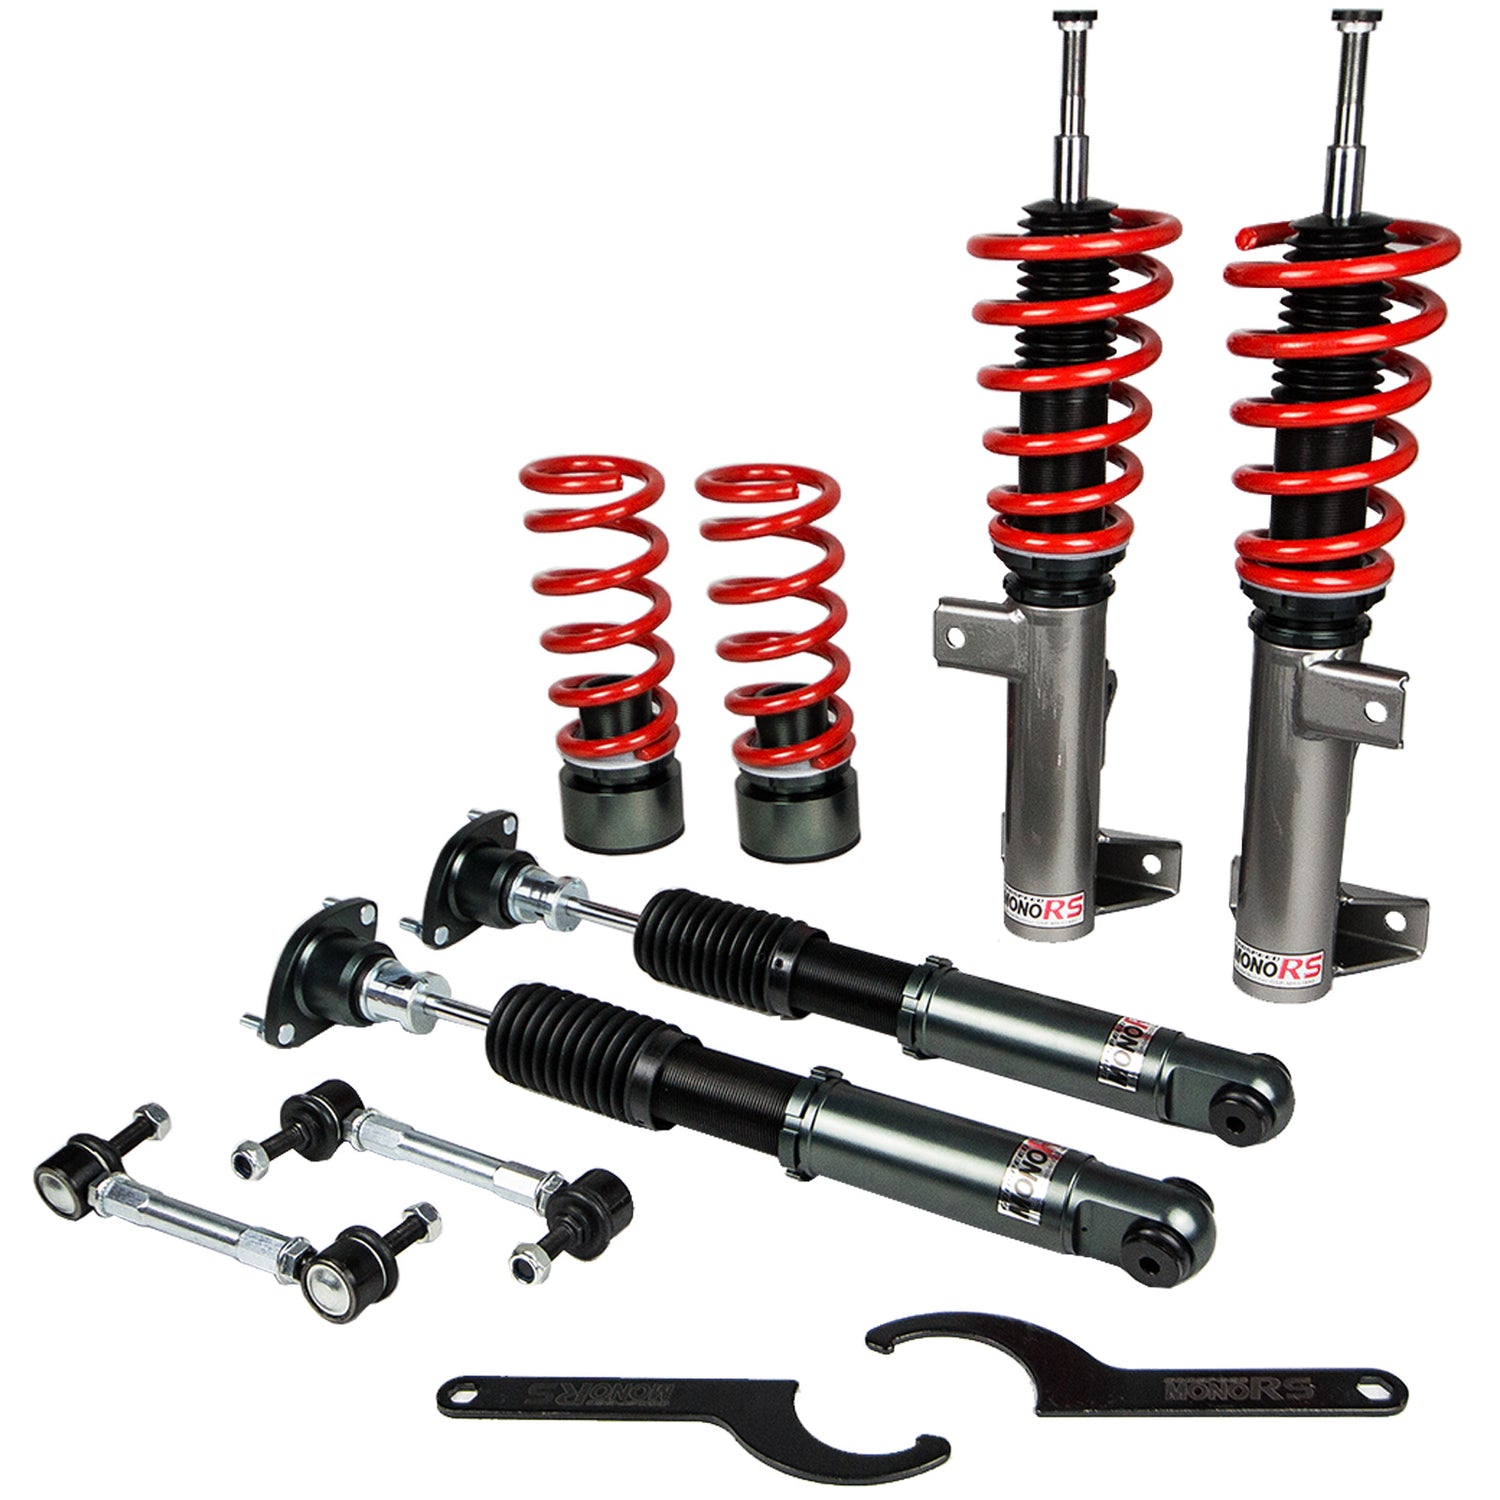 Godspeed MRS1880-B MonoRS Coilover Lowering Kit, 32 Damping Adjustment, Ride Height Adjustable